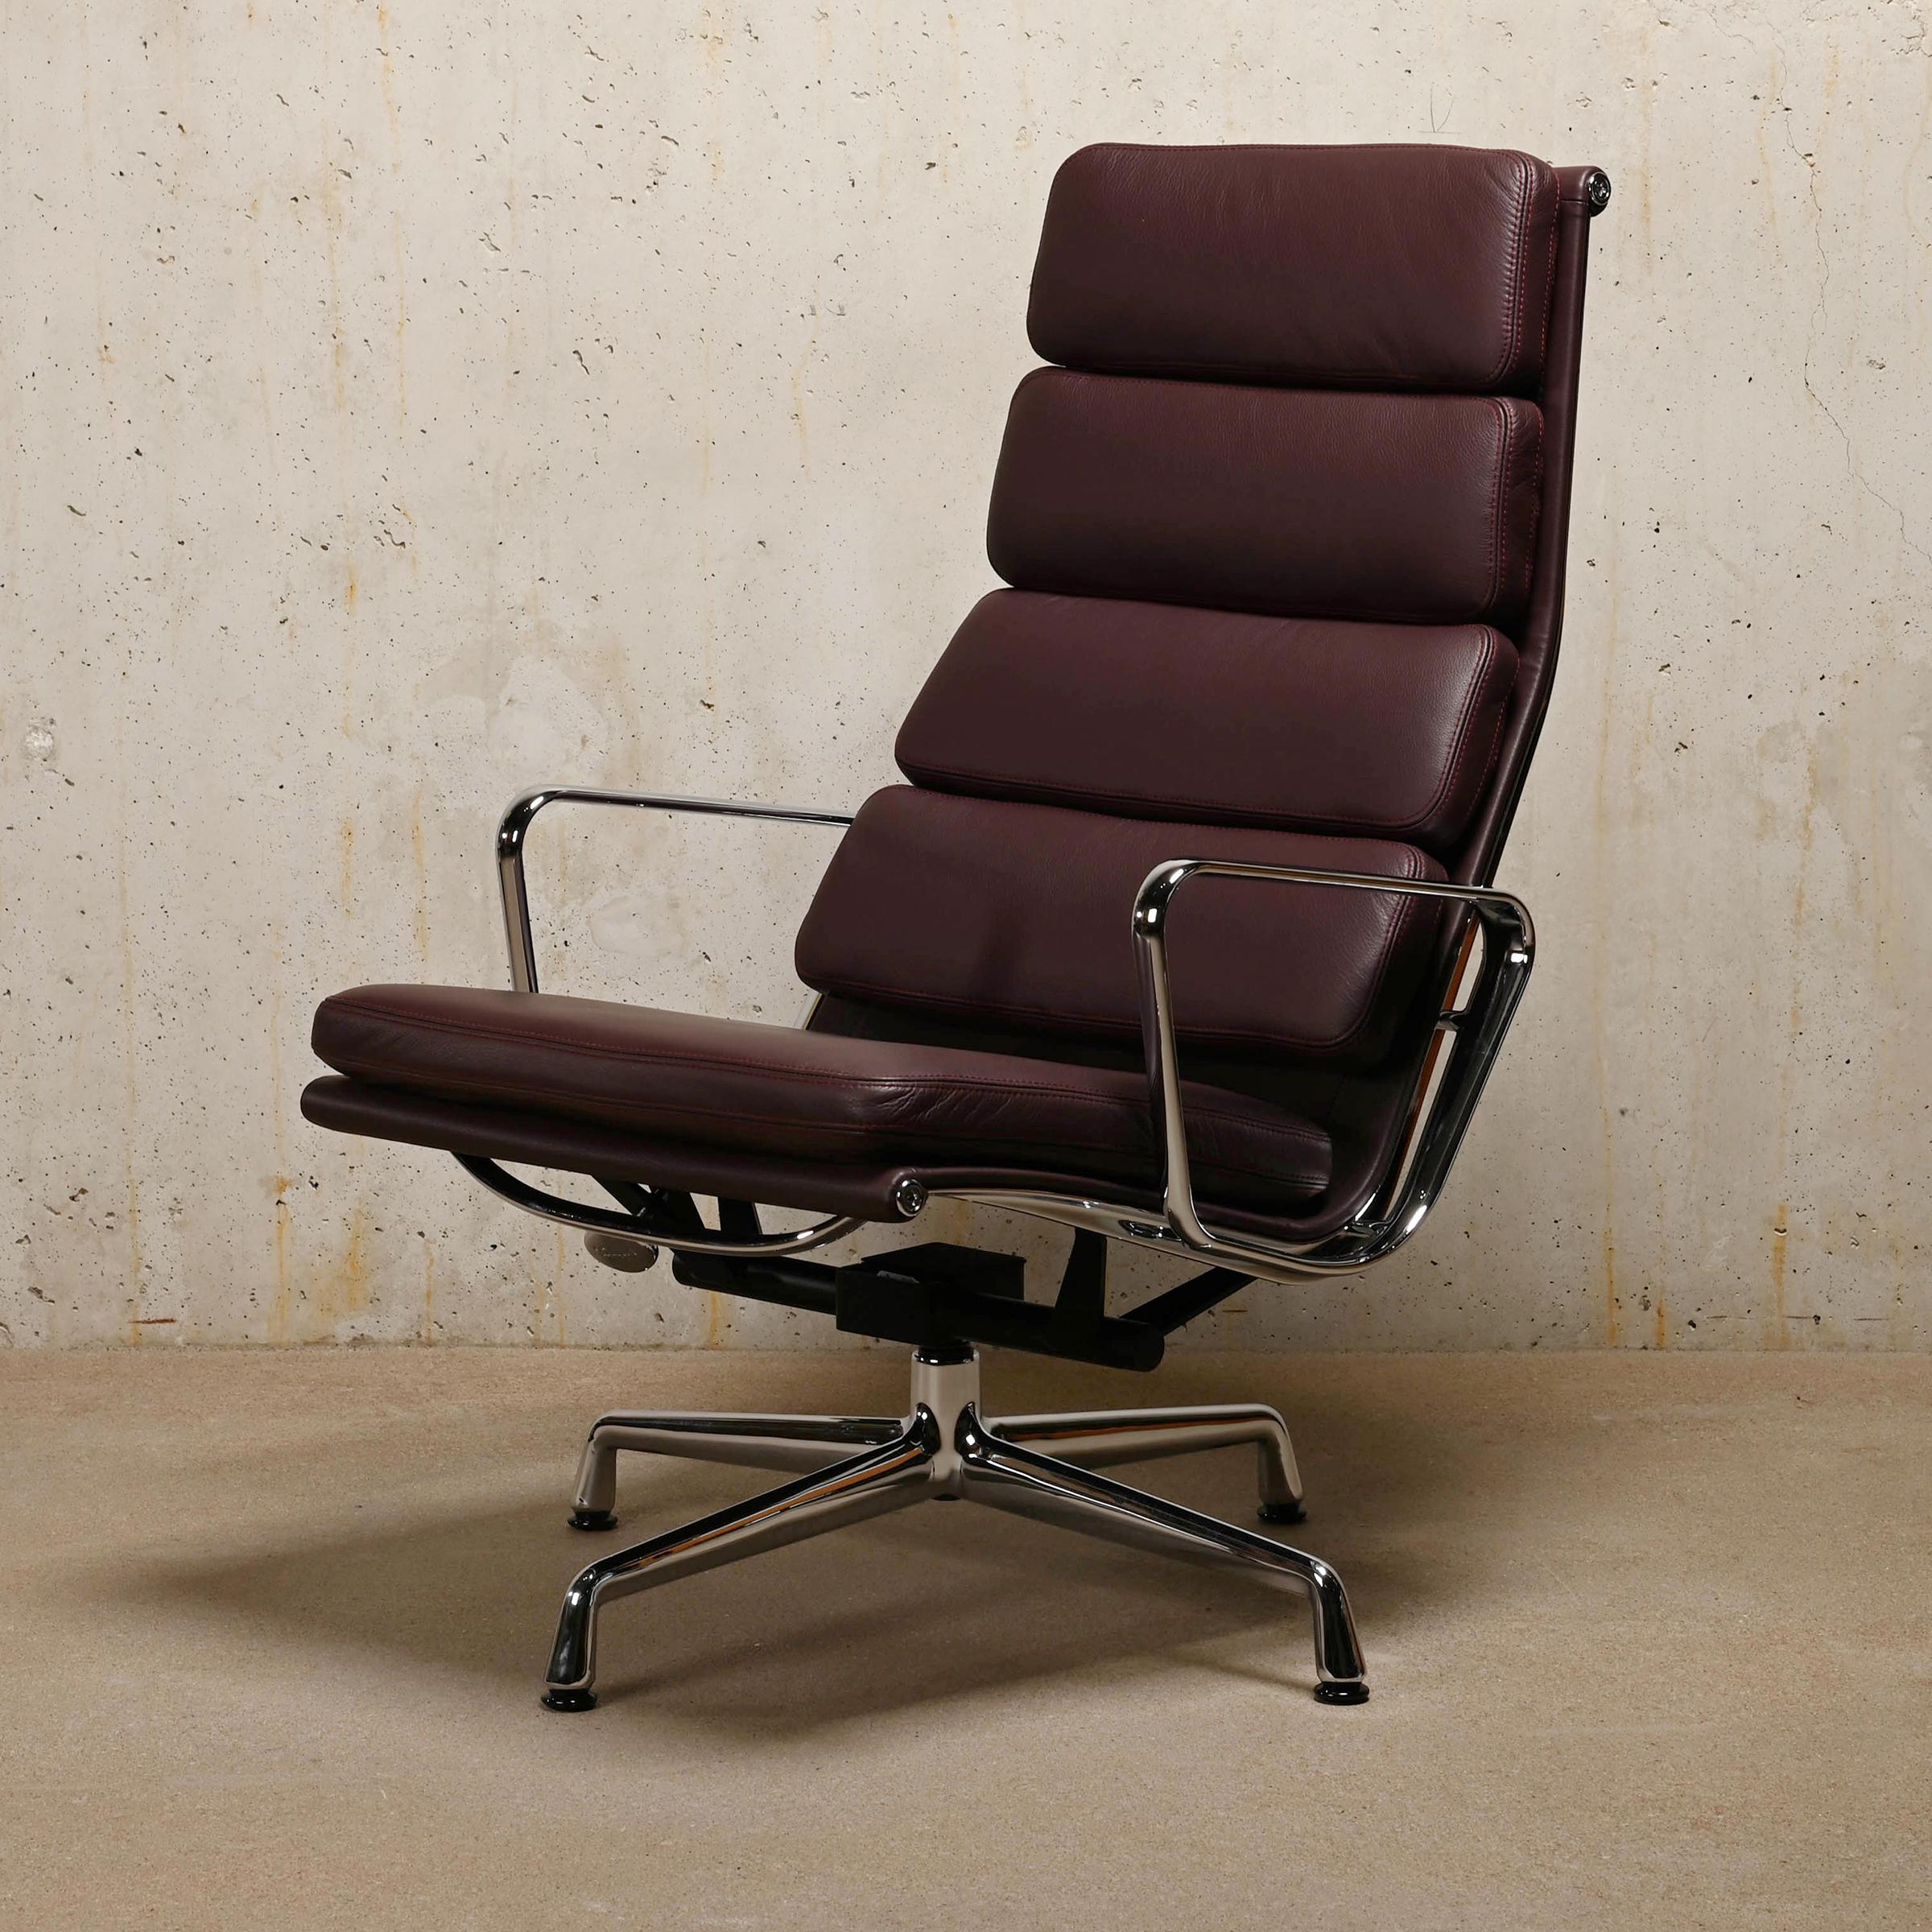 Charles & Ray Eames EA222 Lounge Chair and EA223 Ottoman in Plume Leather, Vitra For Sale 1